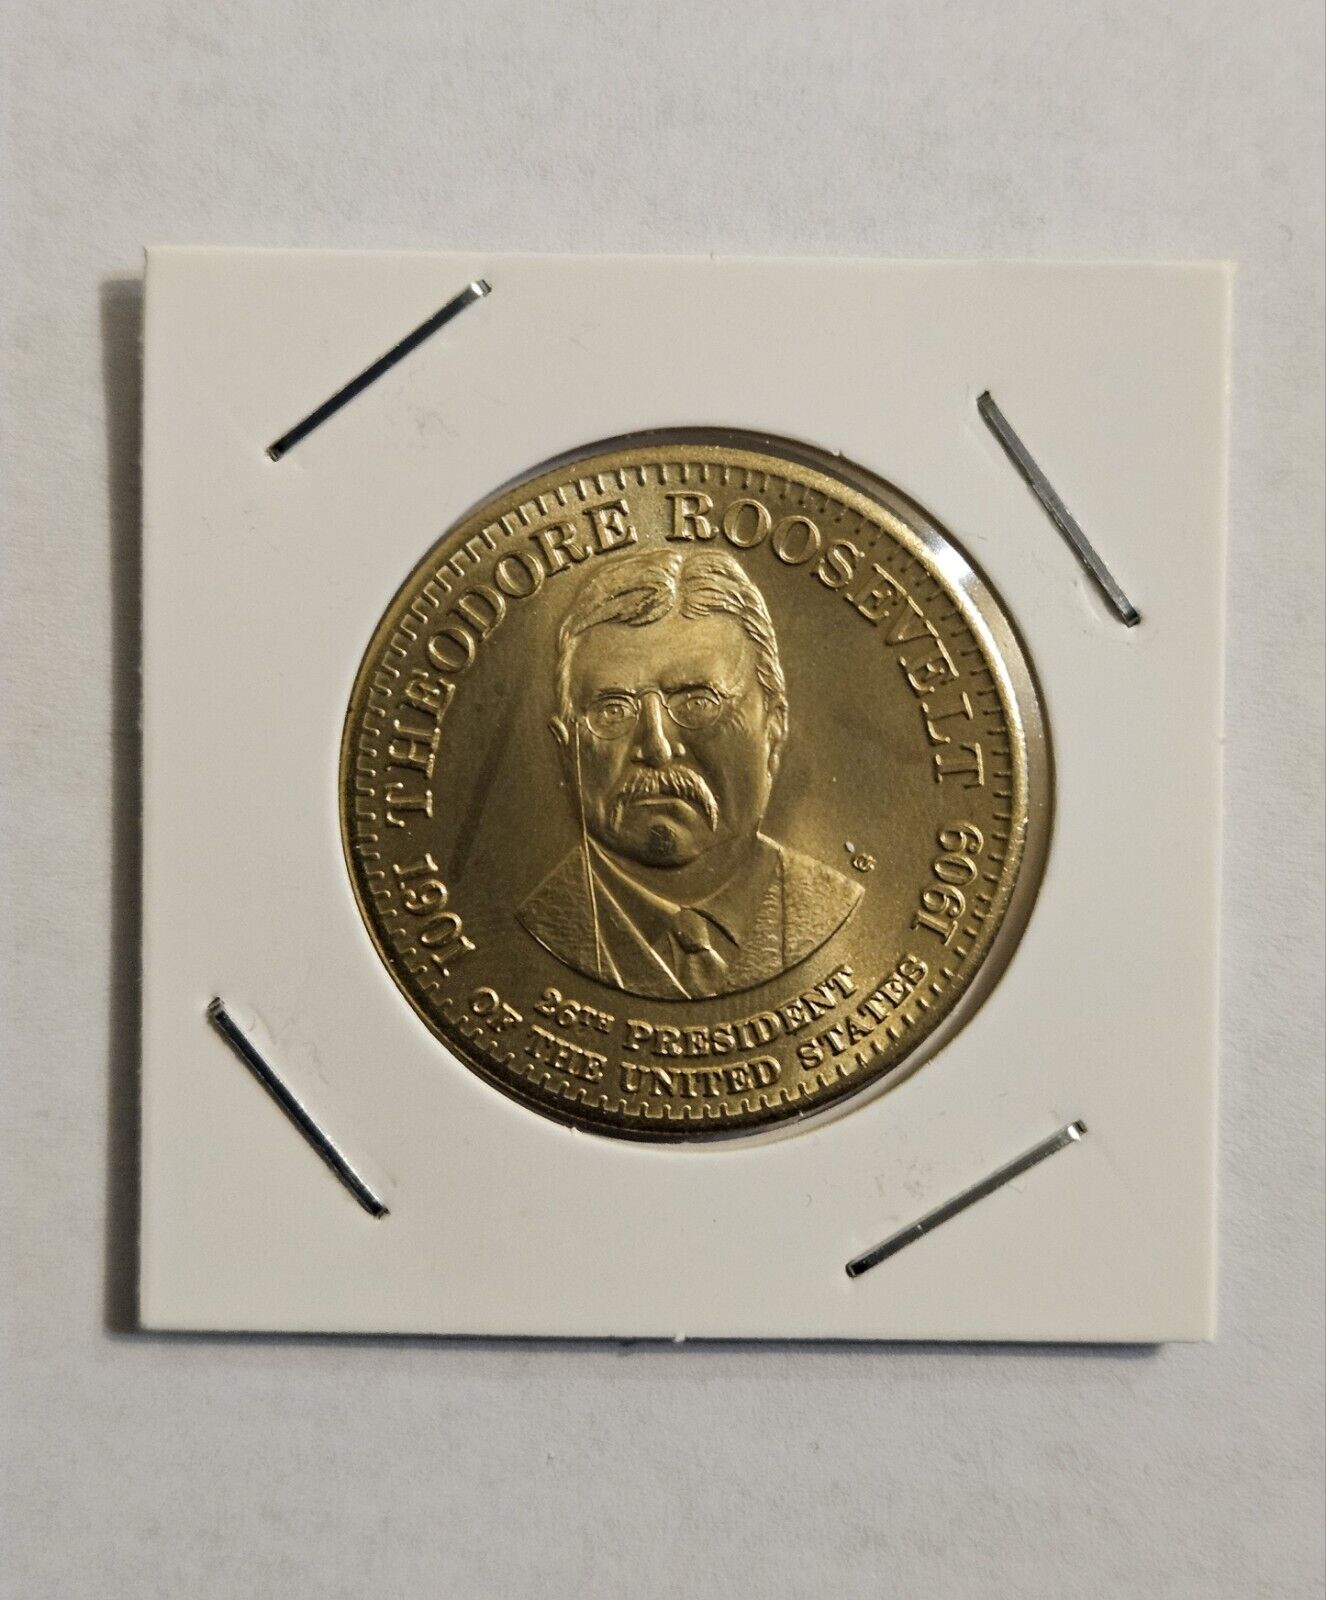 Theodore Roosevelt 26th President 1901-1909 / Commemorative Coin